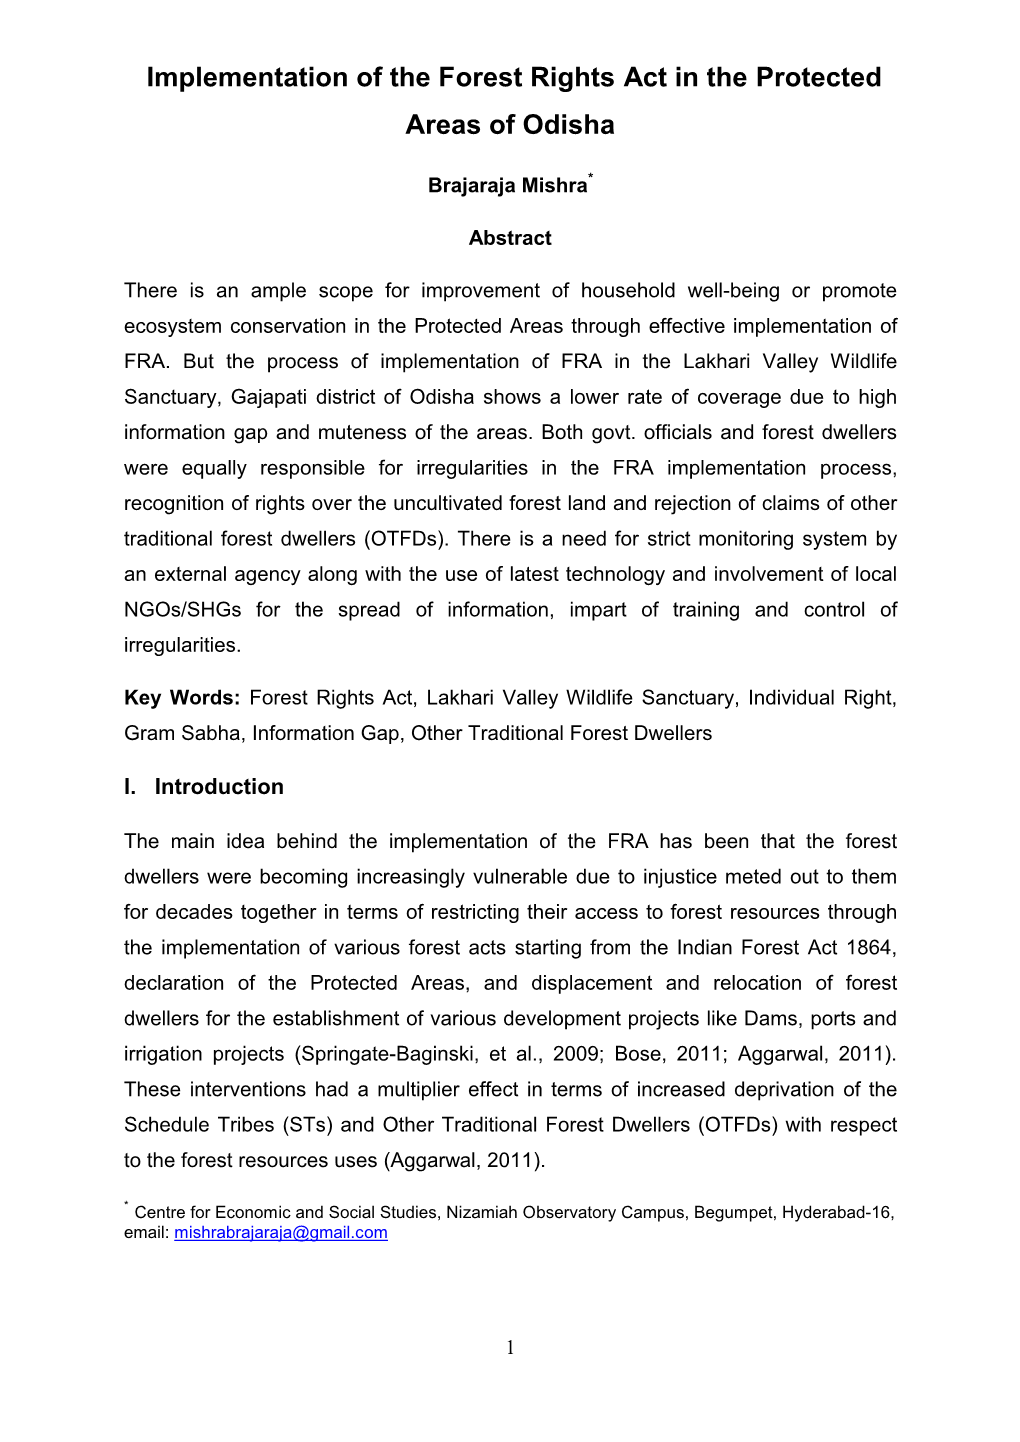 Implementation of the Forest Rights Act in the Protected Areas of Odisha